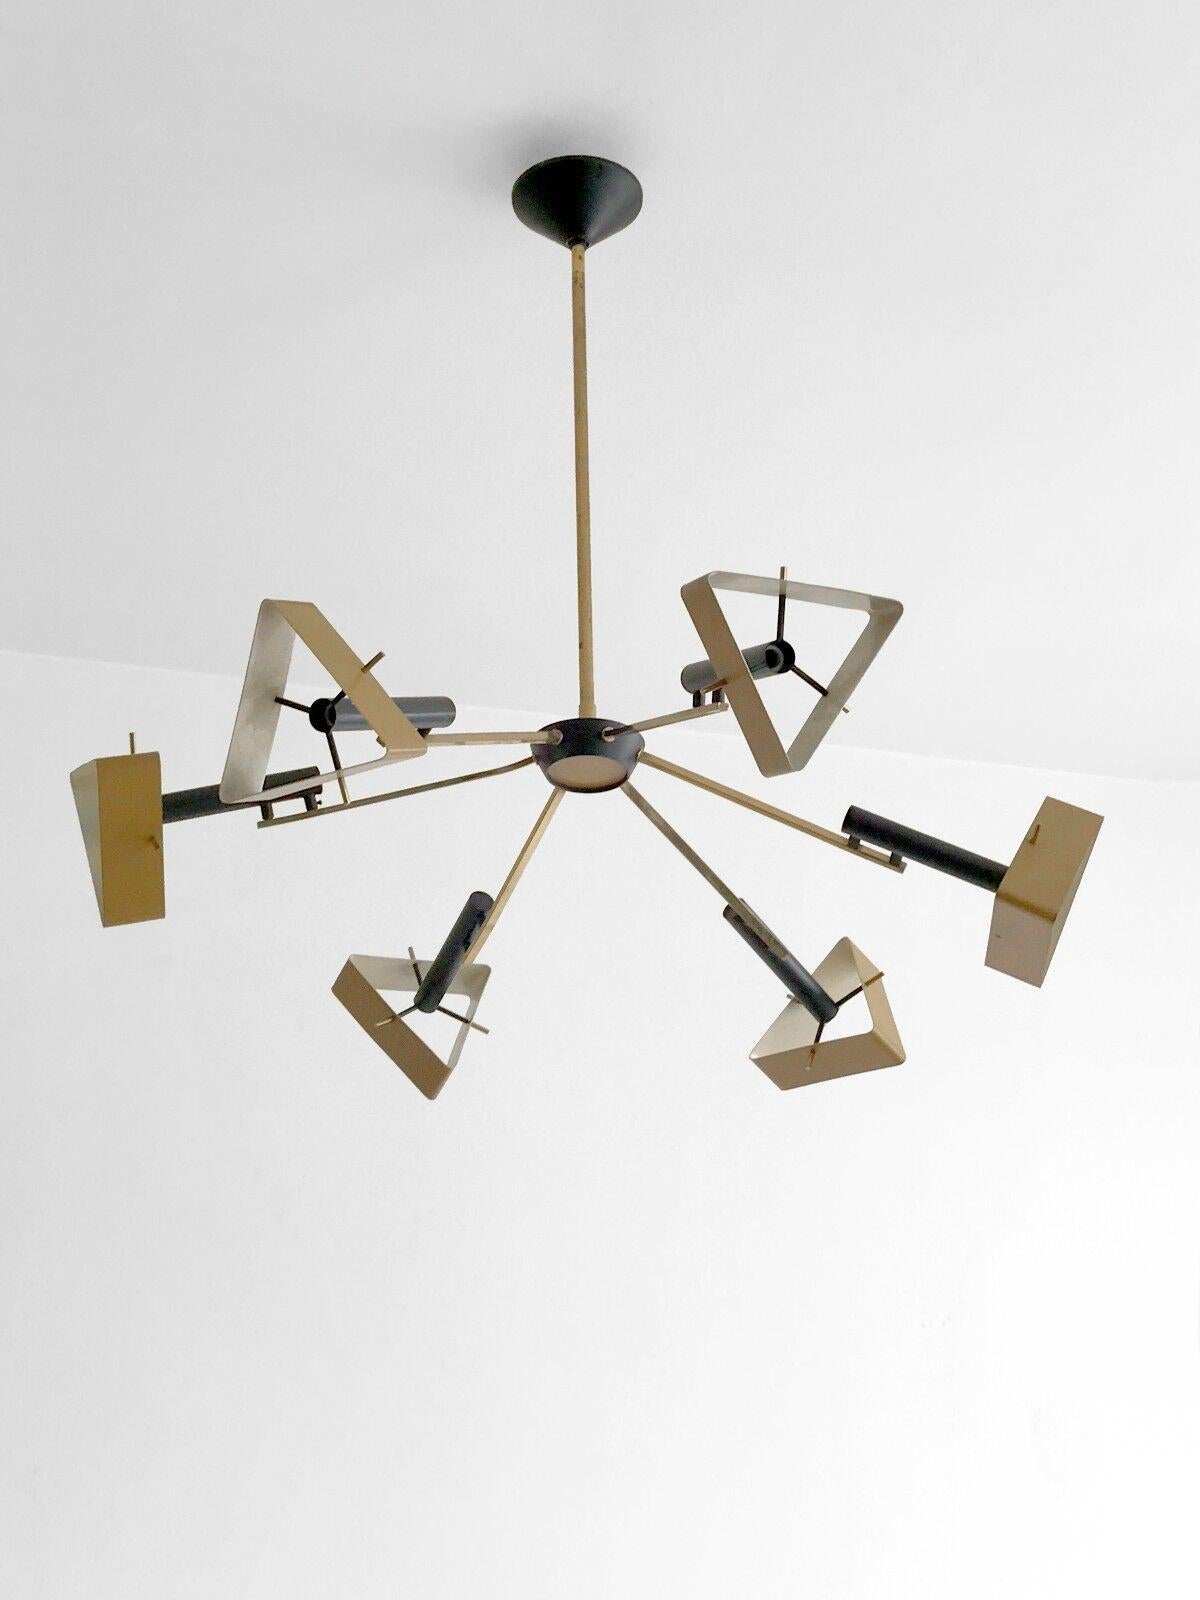 A very rare and spectacular 6-lights suspension, Modern, Bauhaus, Constructiviste, Forme-Libre, in white
A spectacular and extremely rare 6-light pendant light, Modernist, Bauhaus, Constructivist, from Forme-Libre, in white perspex and black and